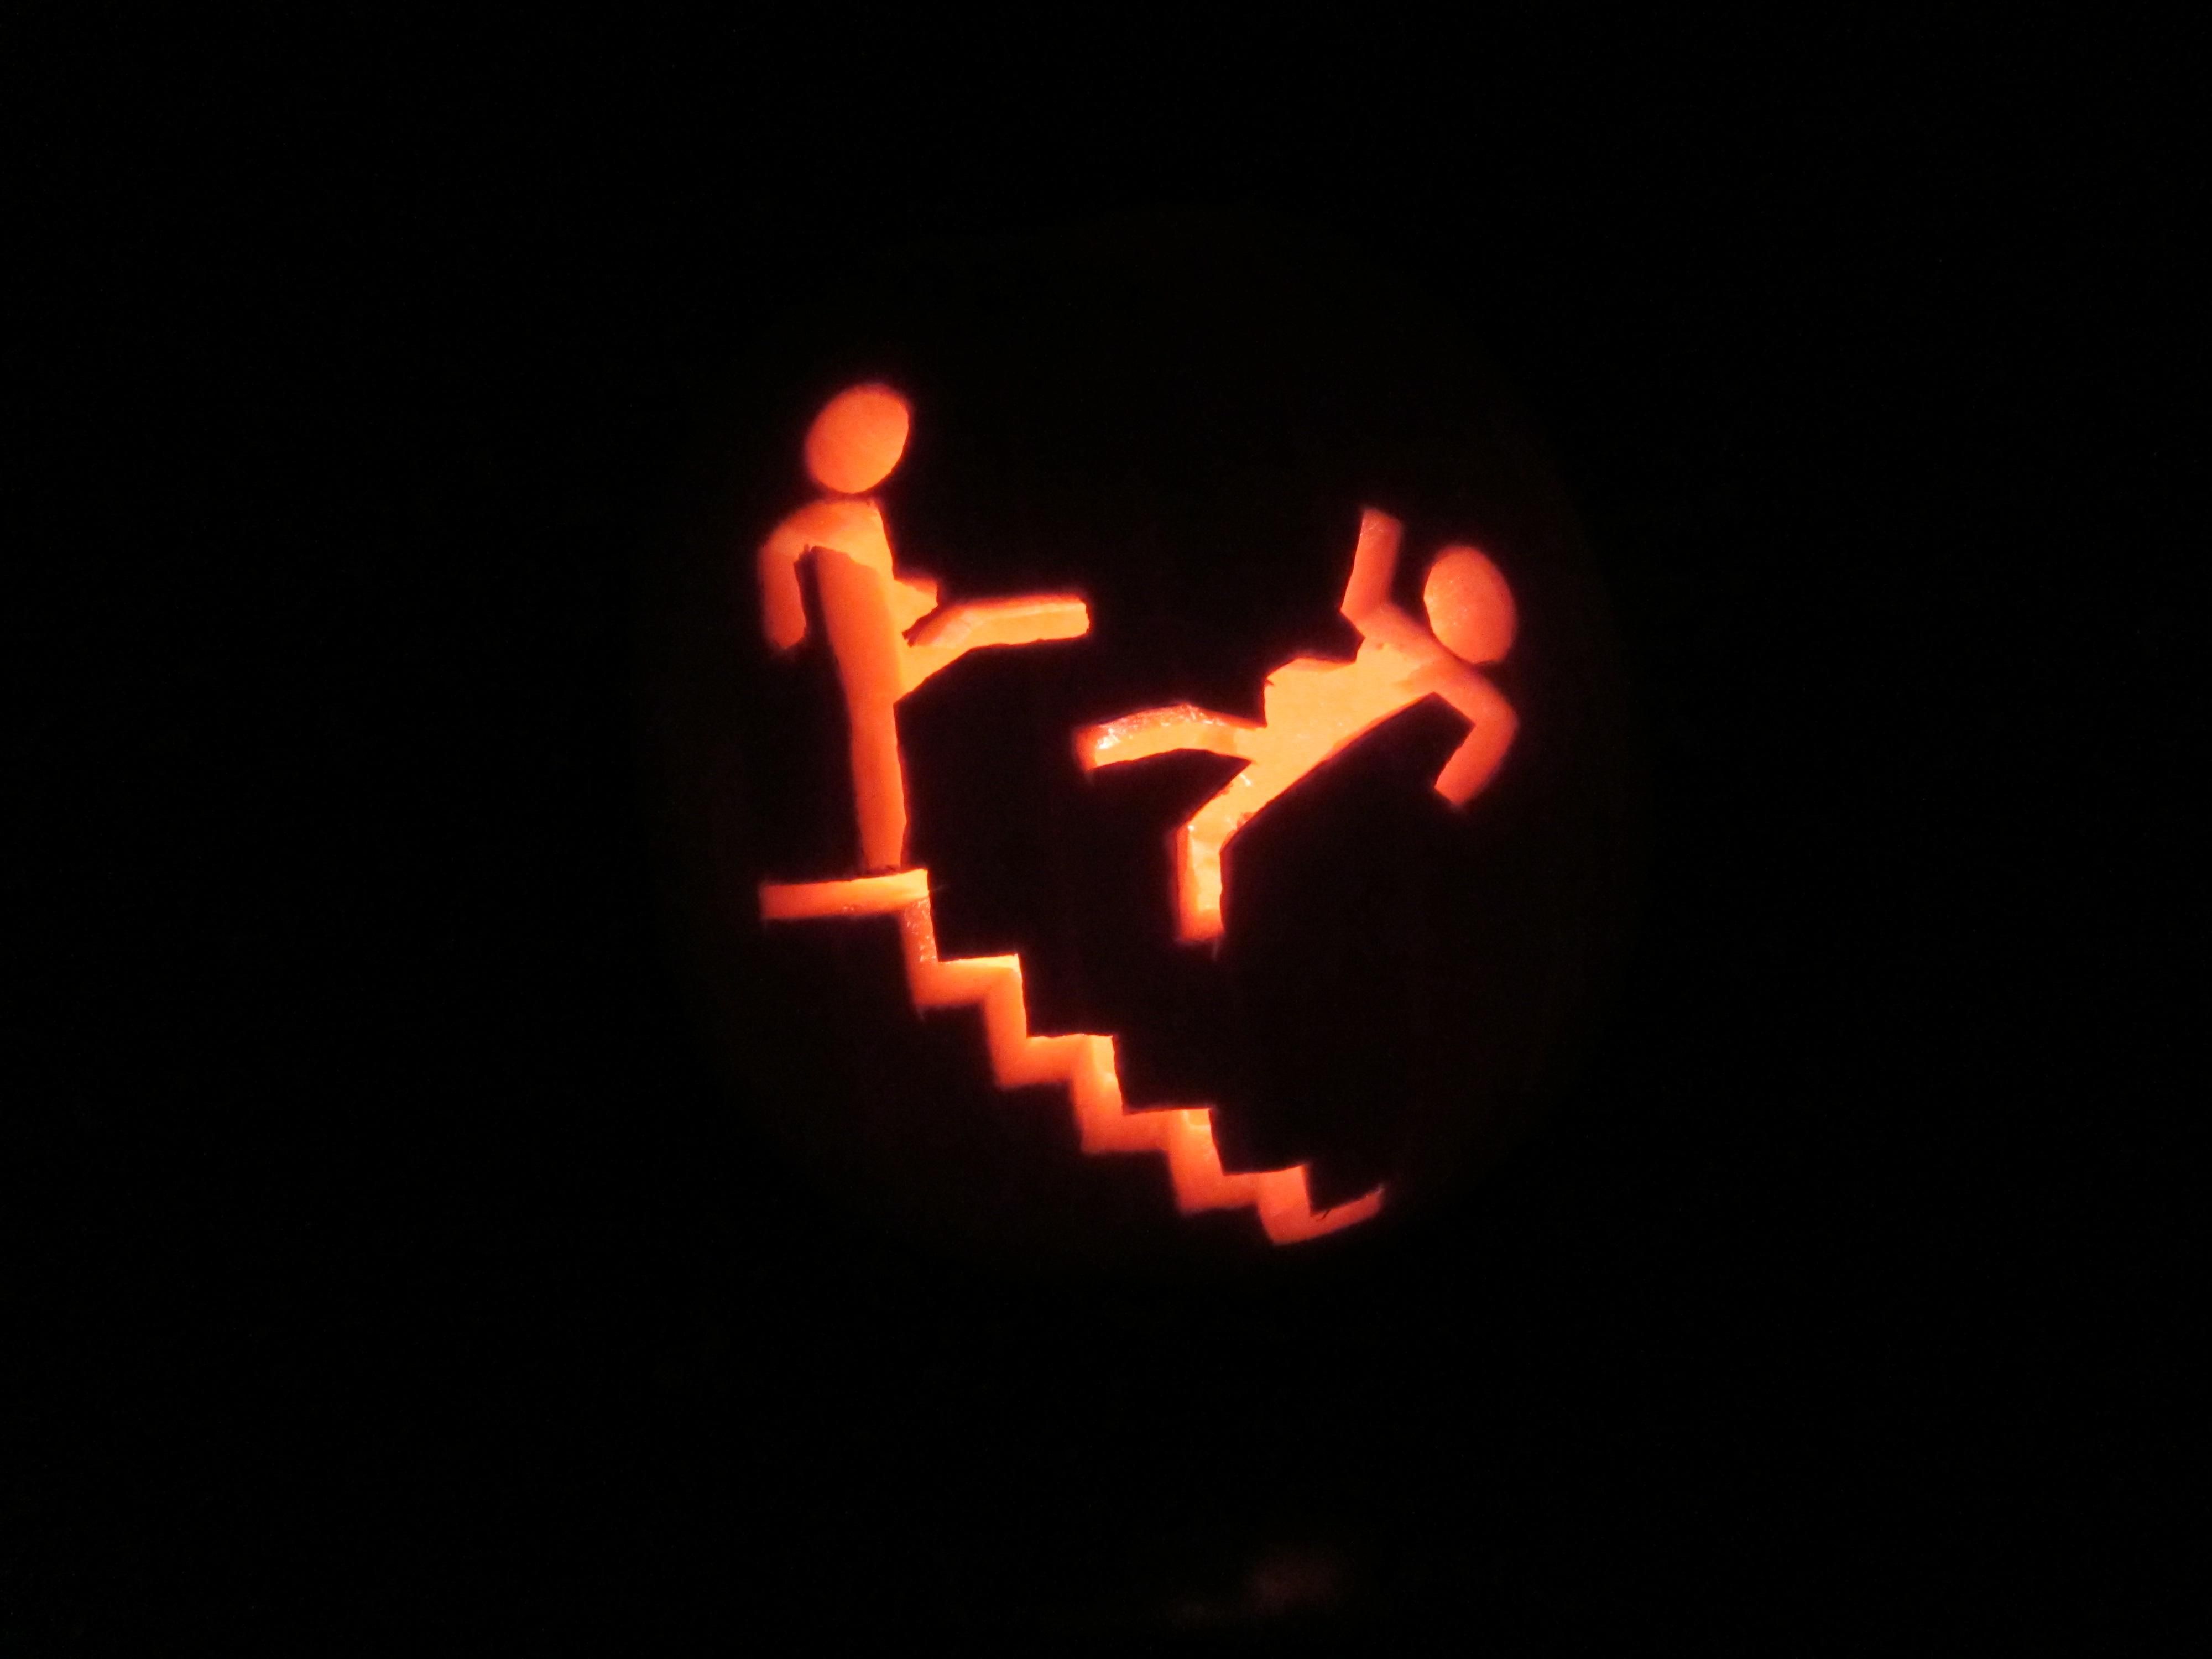 I did not win the company pumpkin carving contest.